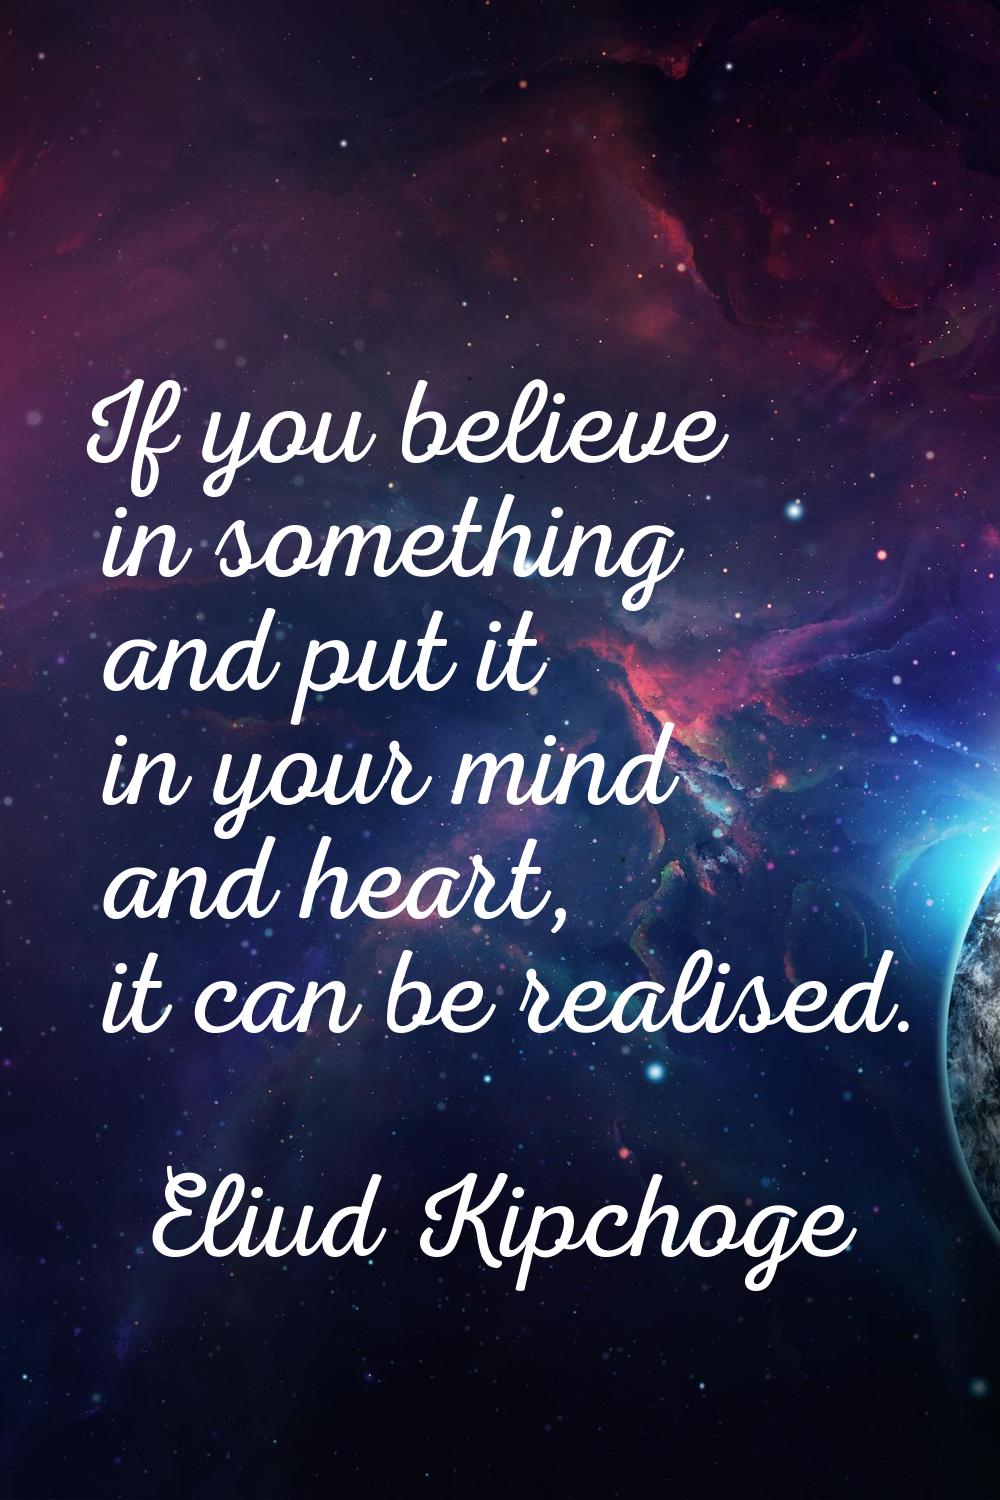 If you believe in something and put it in your mind and heart, it can be realised.